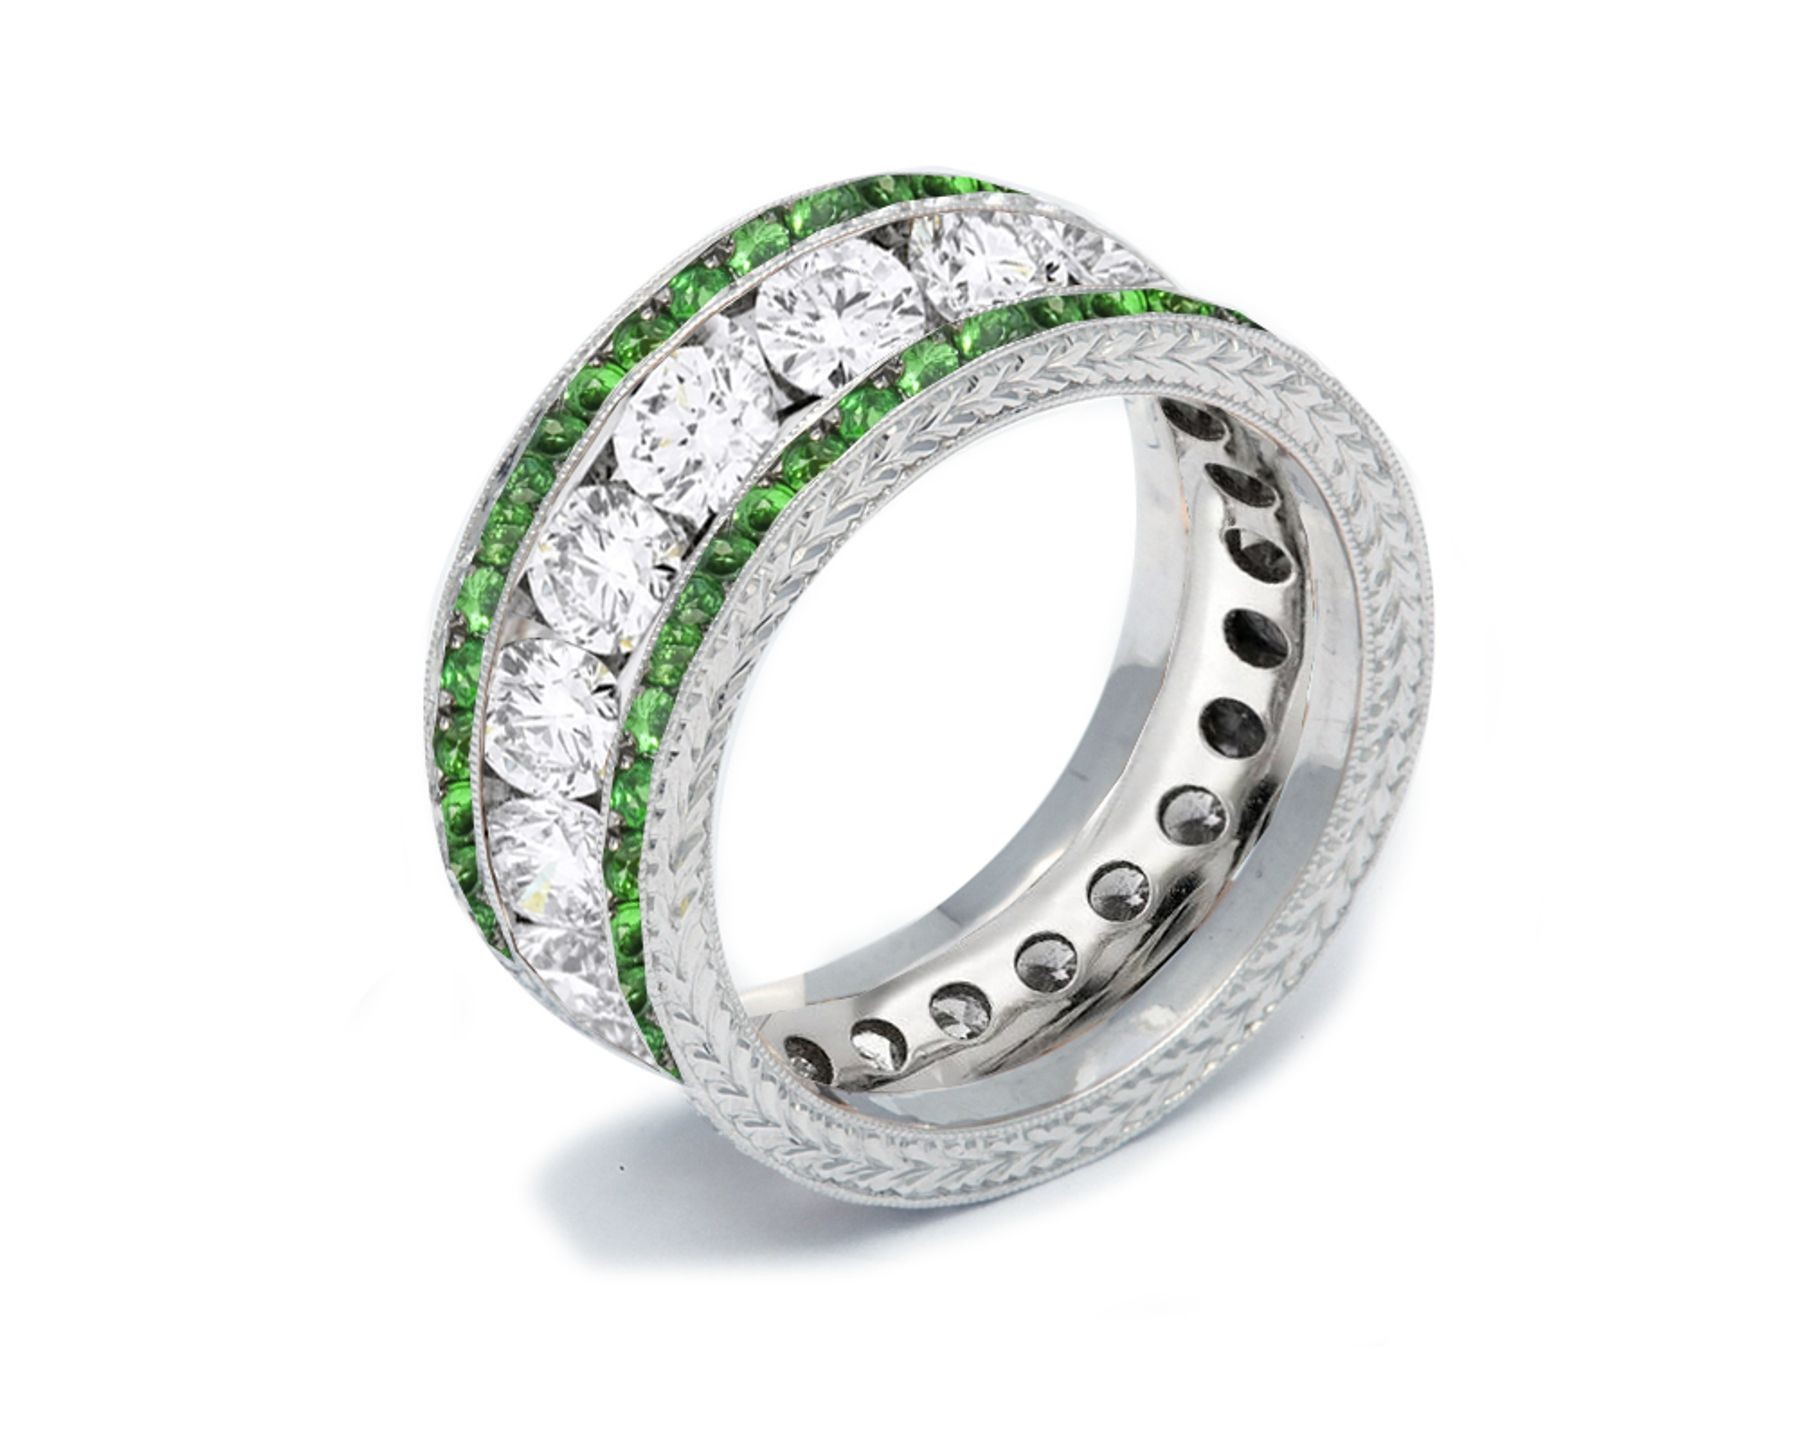 Shop Fine Quality Made To Order Round Hand Engraved Diamond & Emerald Eternity Style Wedding & Anniversary Rings